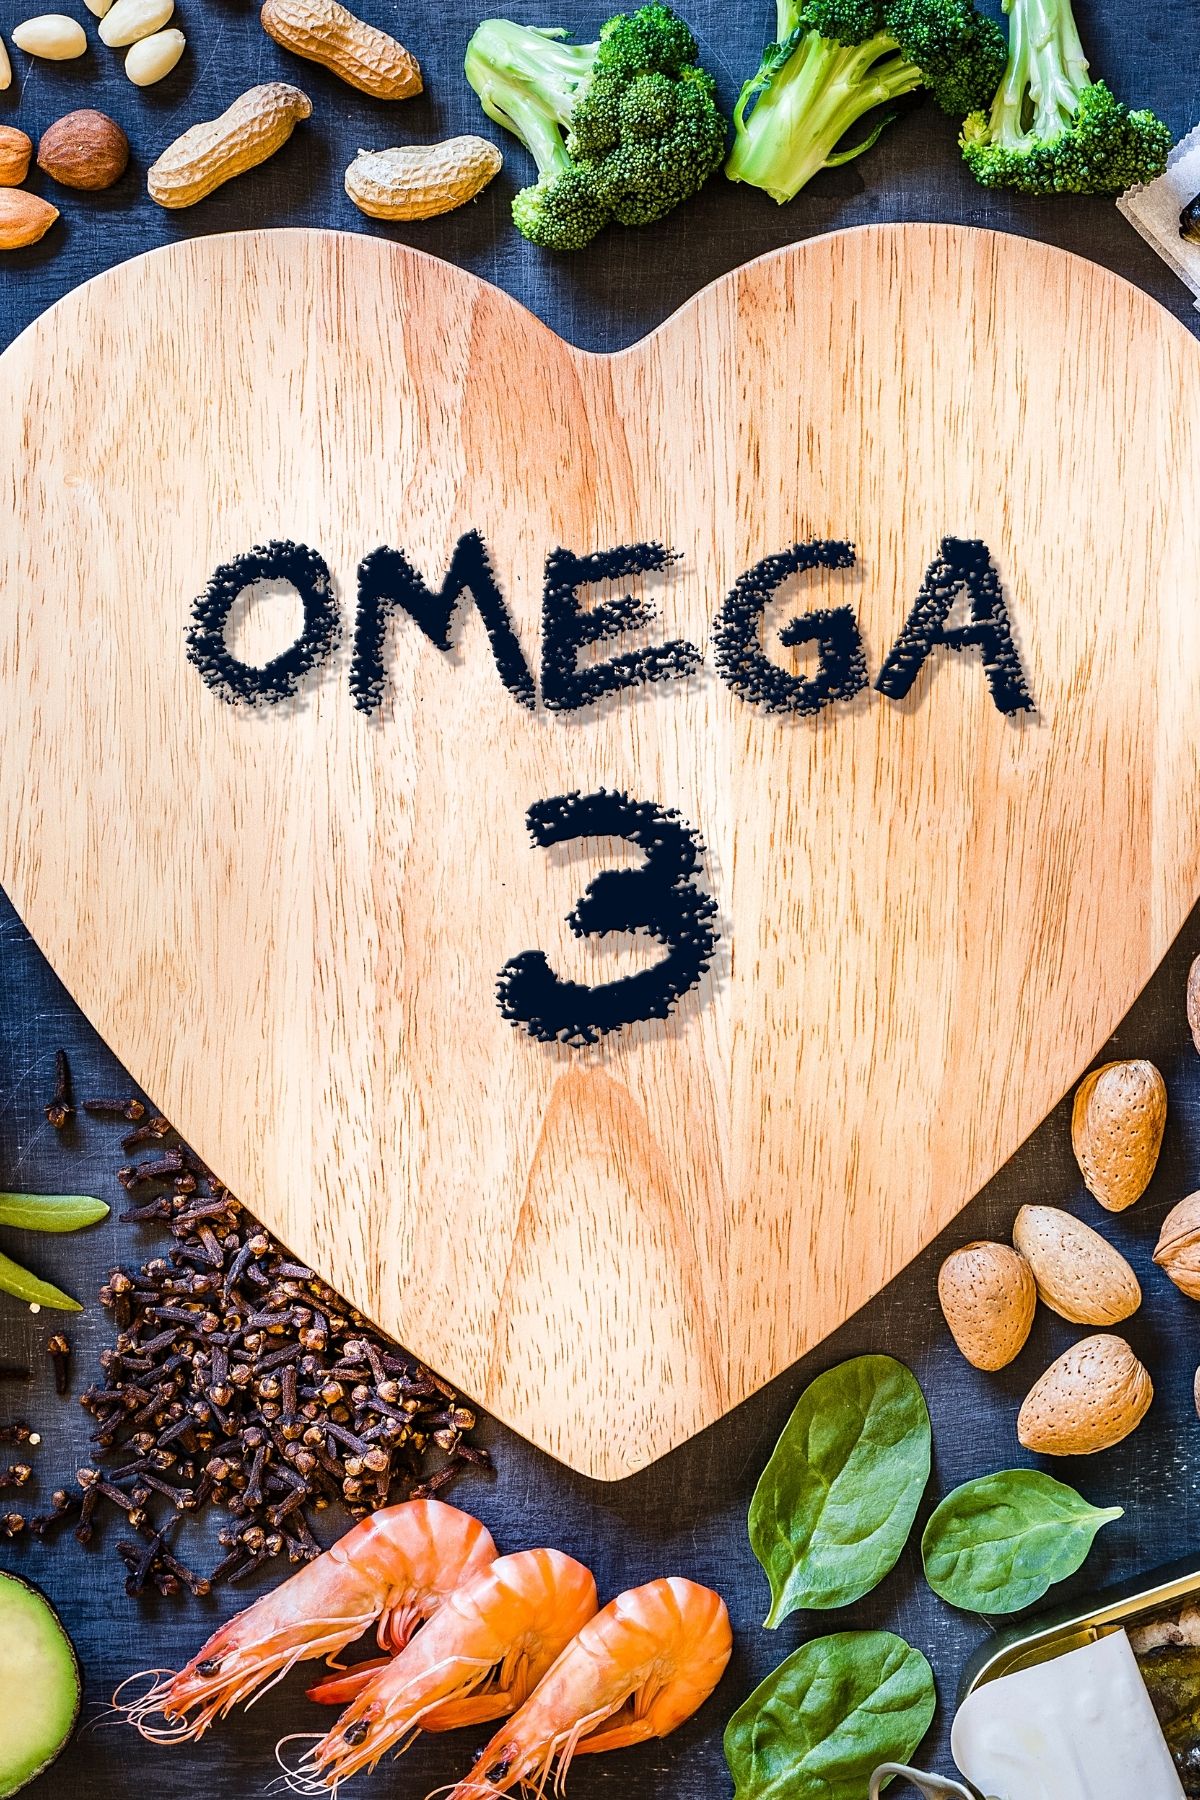 various foods rich in omega 3s surrounding a wooden heart.